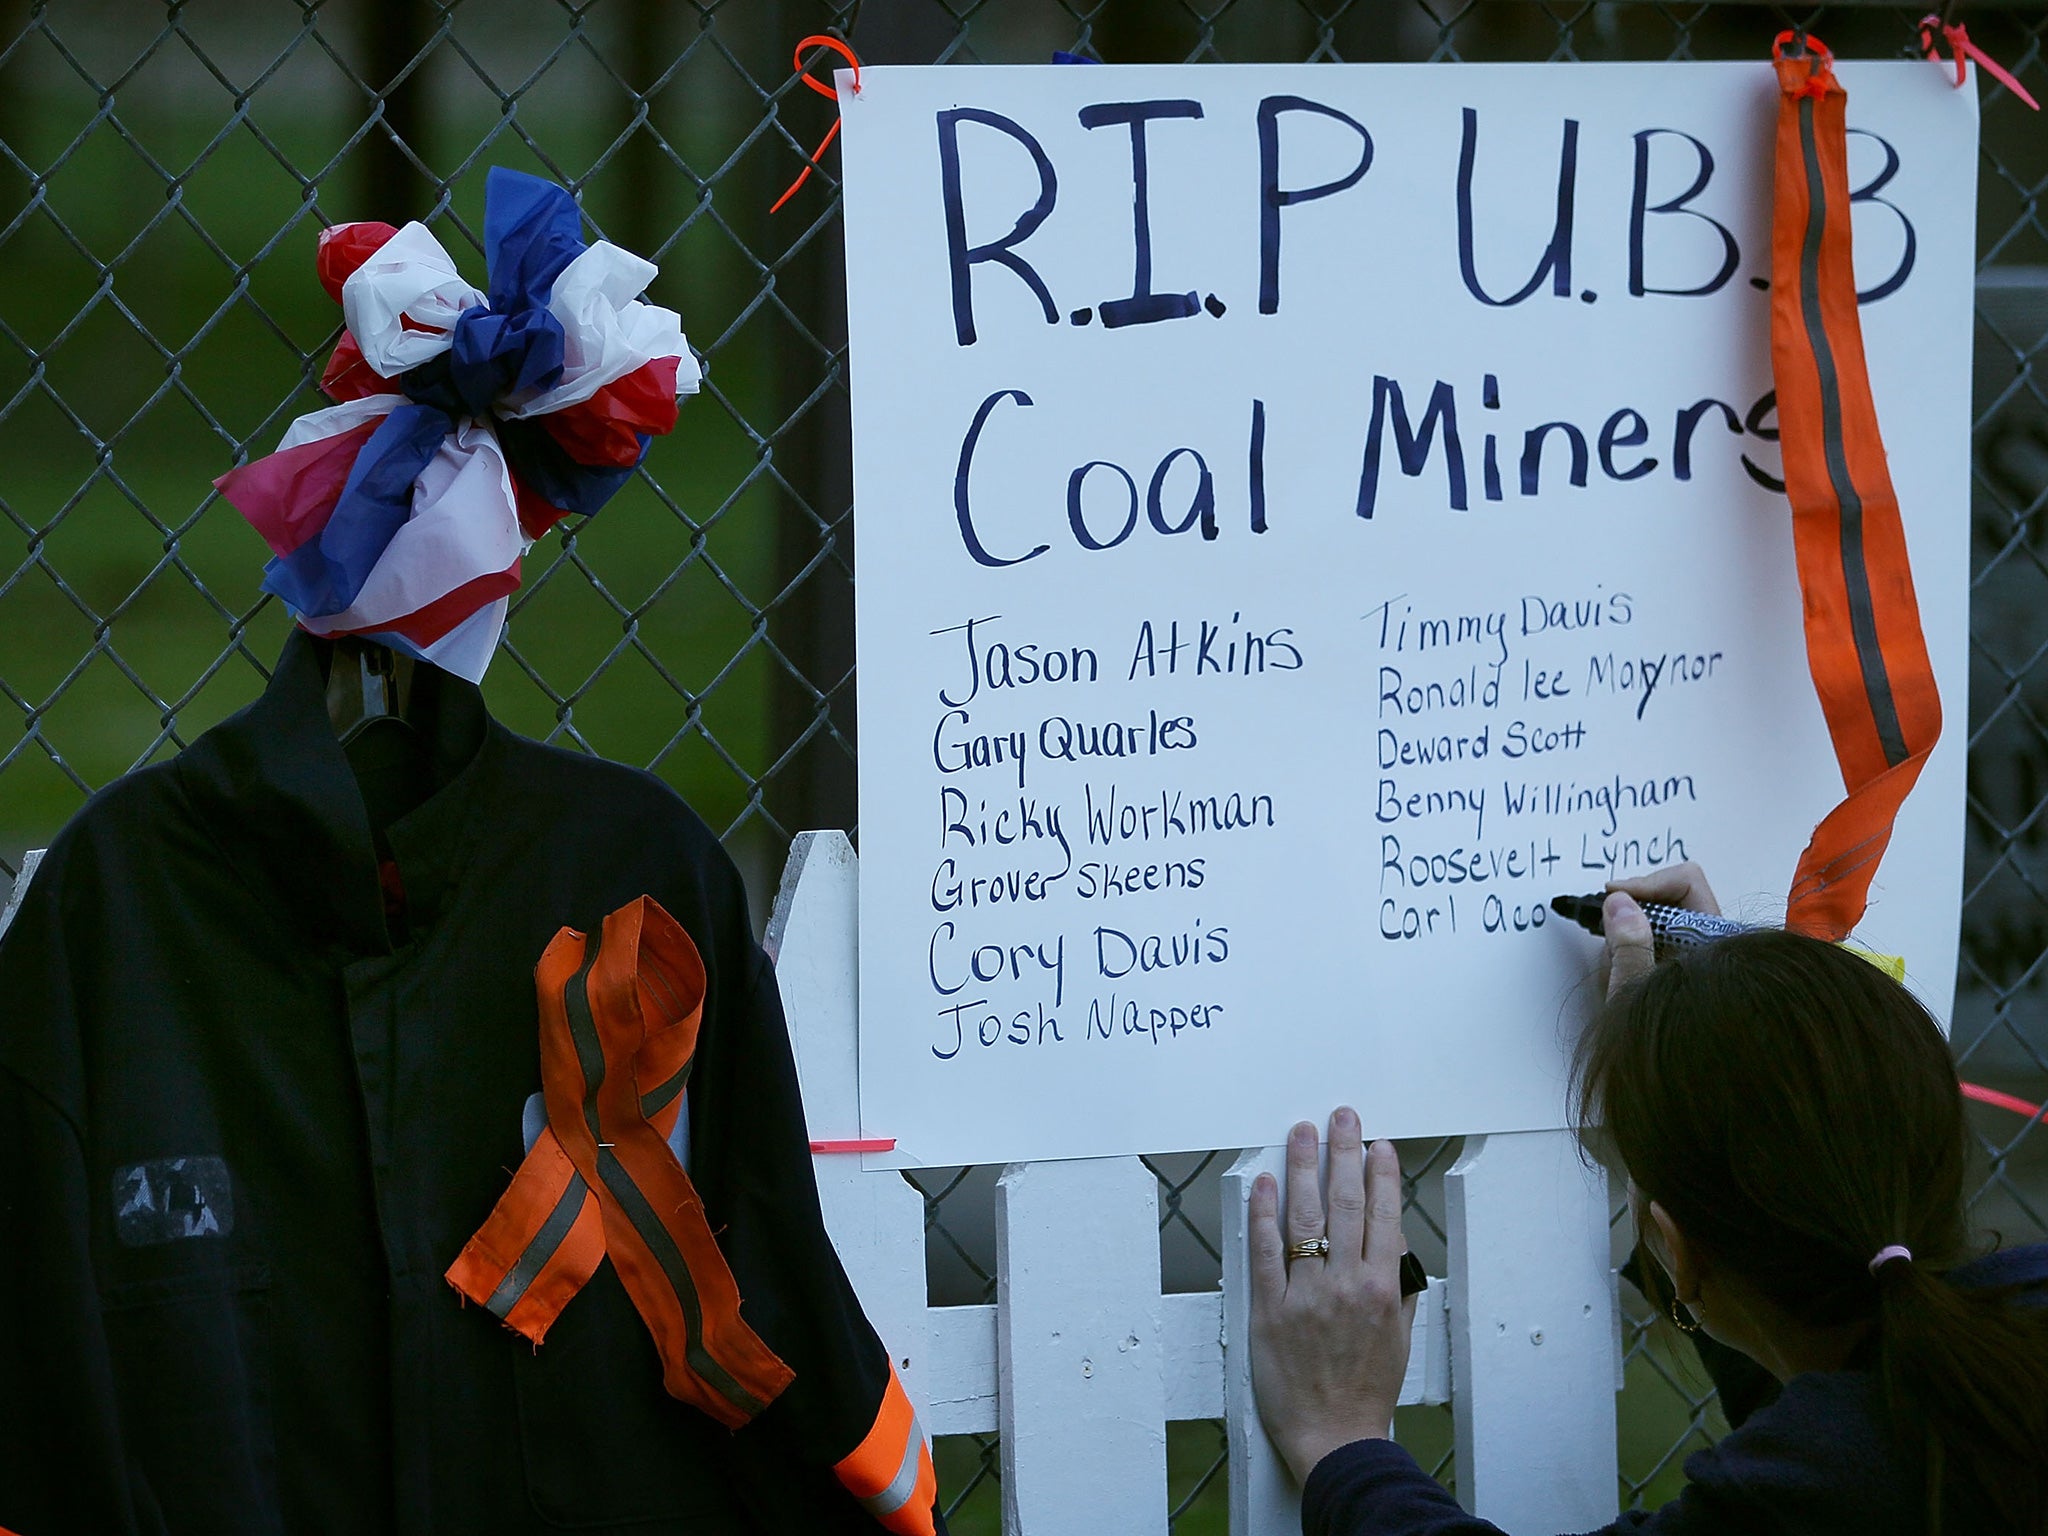 A memorial in Whitesville, West Virginia, lists the names of the miners who were killed in a methane gas explosion in Massey Energy’s Upper Big Branch mine in 2010